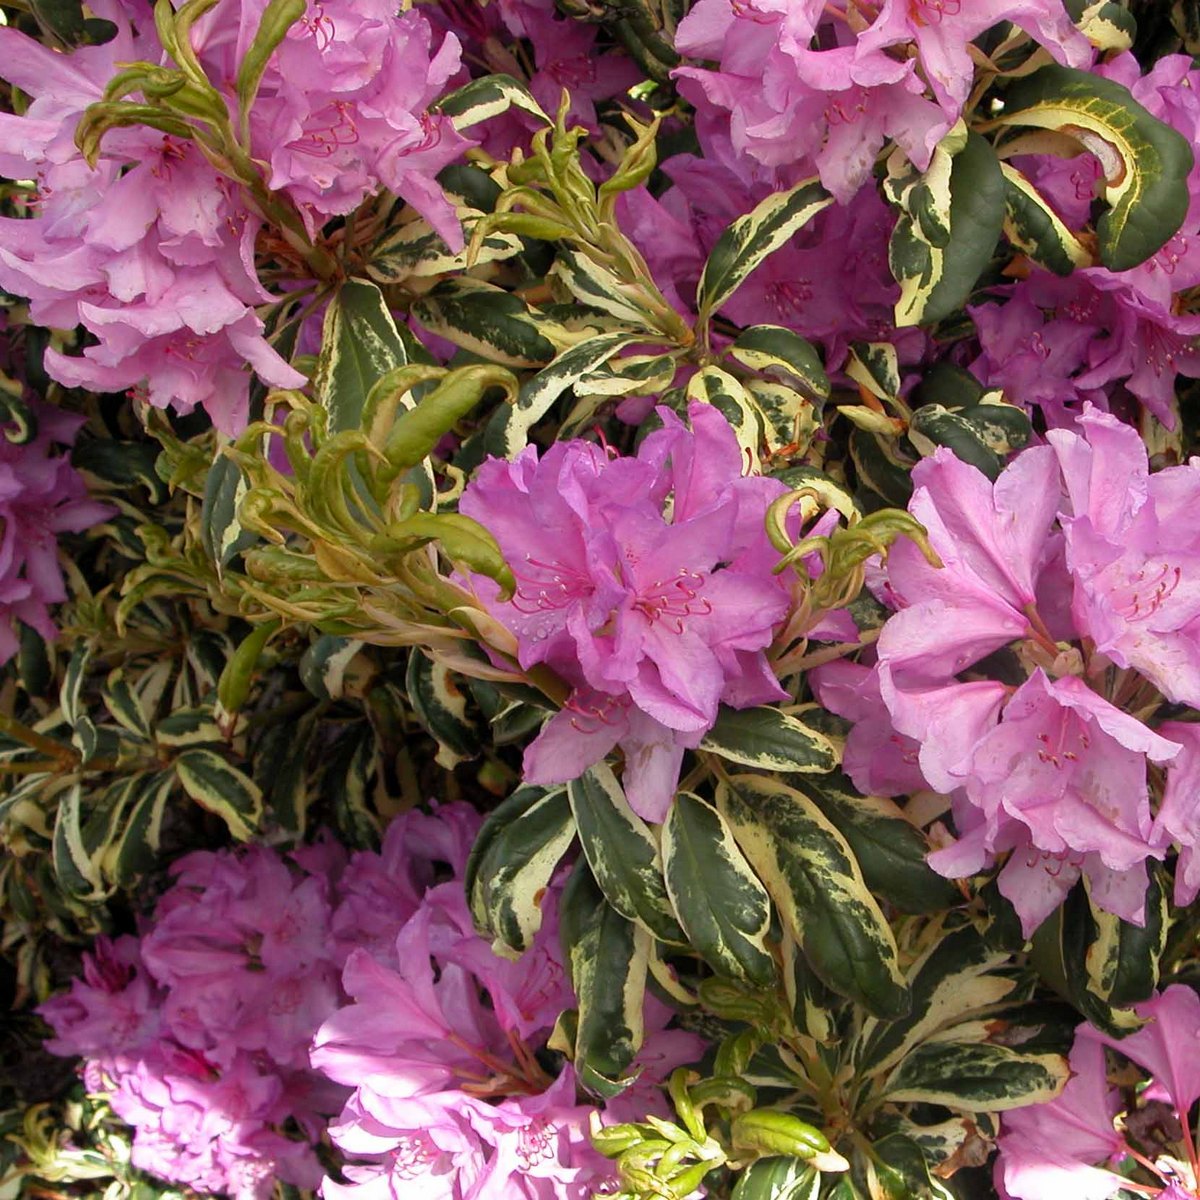 CAROLINA SPRING Rhododendron Rhododendron Larger Hybrids